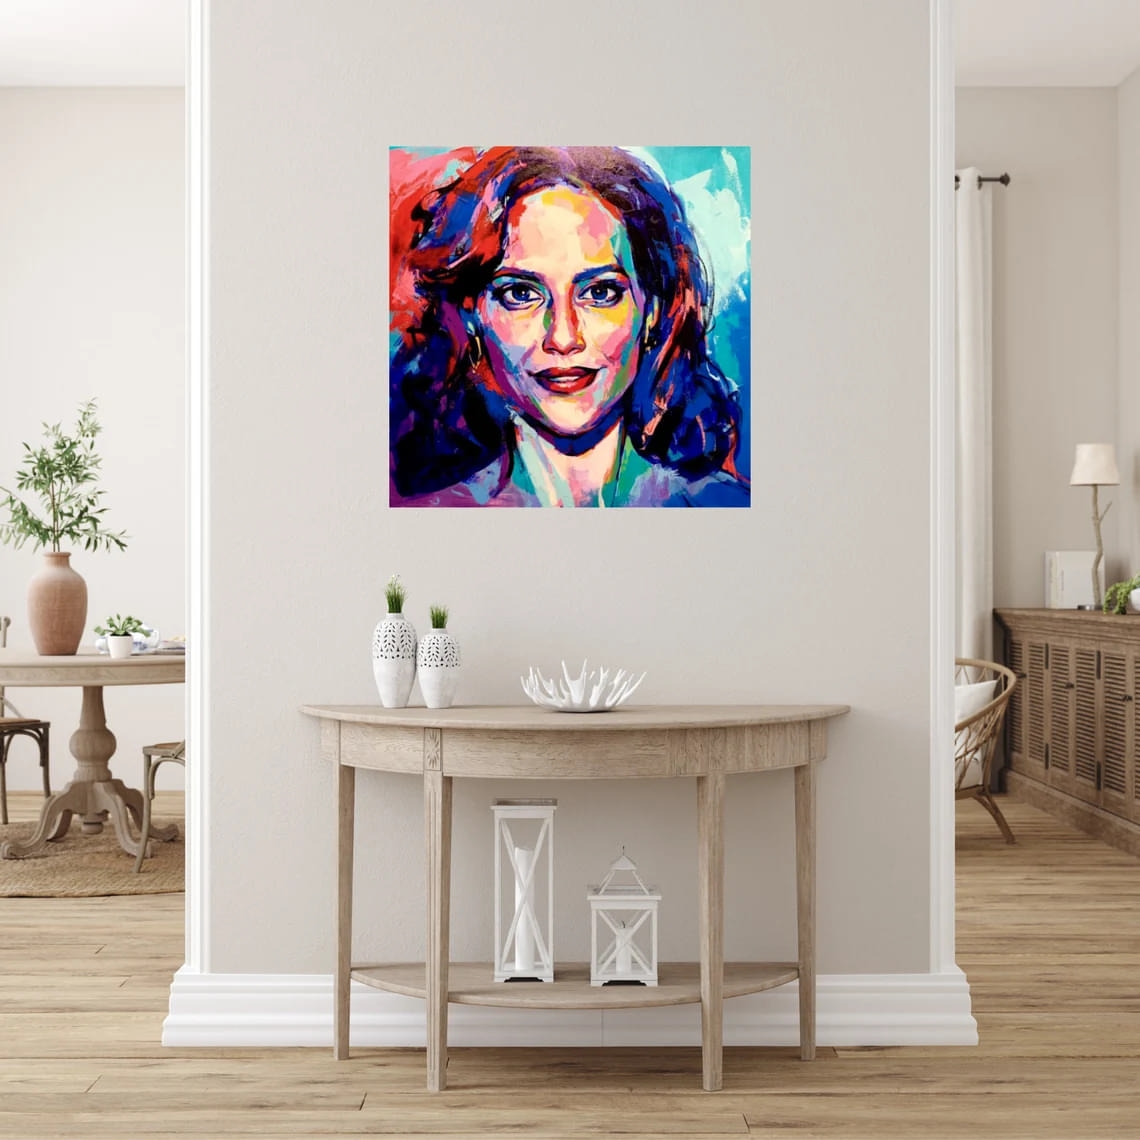 "Brittany Murphy" - Portraits Artwork Sample on Wall